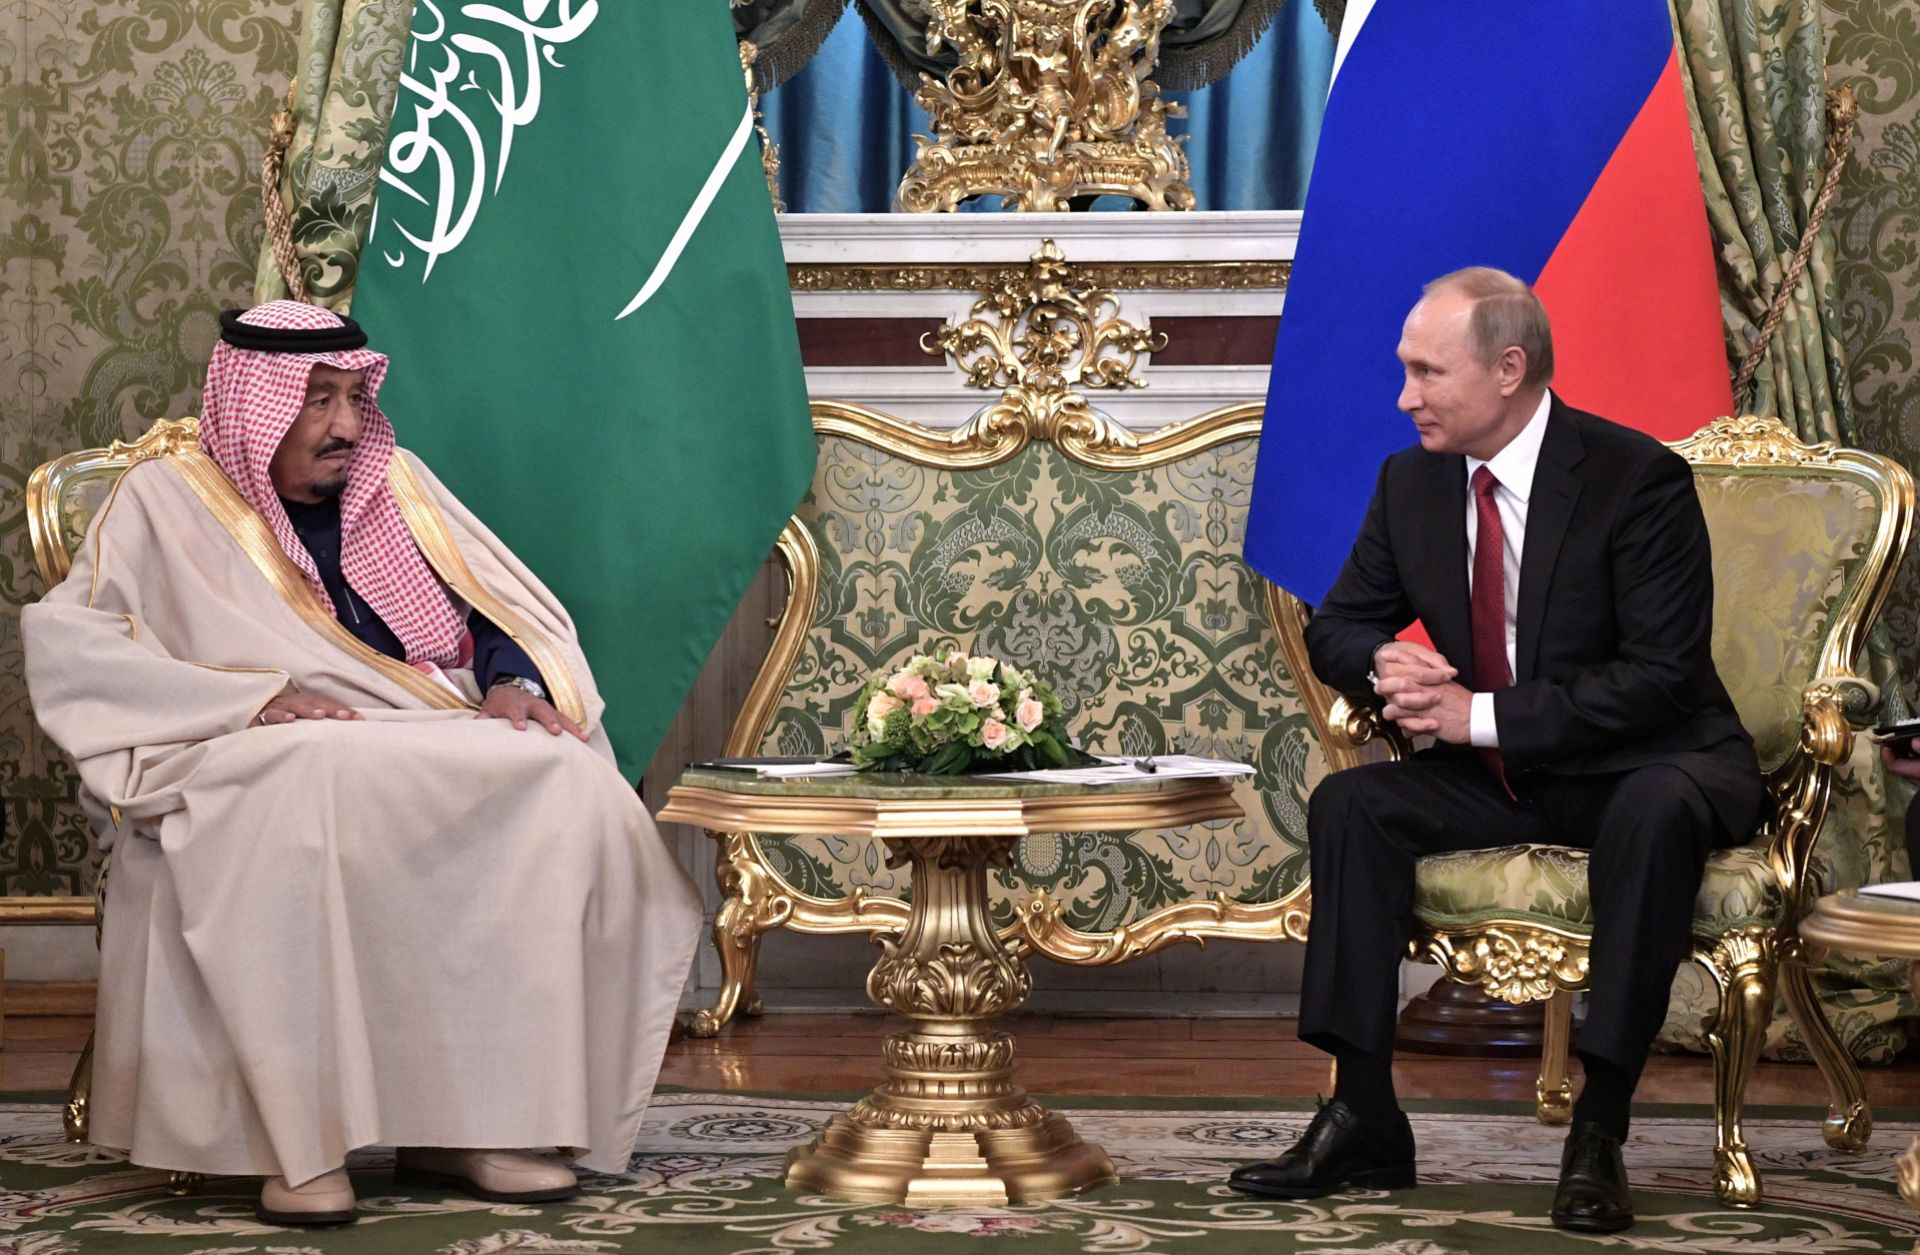 Russian President Vladimir Putin (R) meets with Saudi King Salman at the Kremlin in Moscow on Oct. 5, 2017. Saudi Arabia and Russia aren't on the friendliest of terms, but circumstances have aligned in such a way that each needs the other.